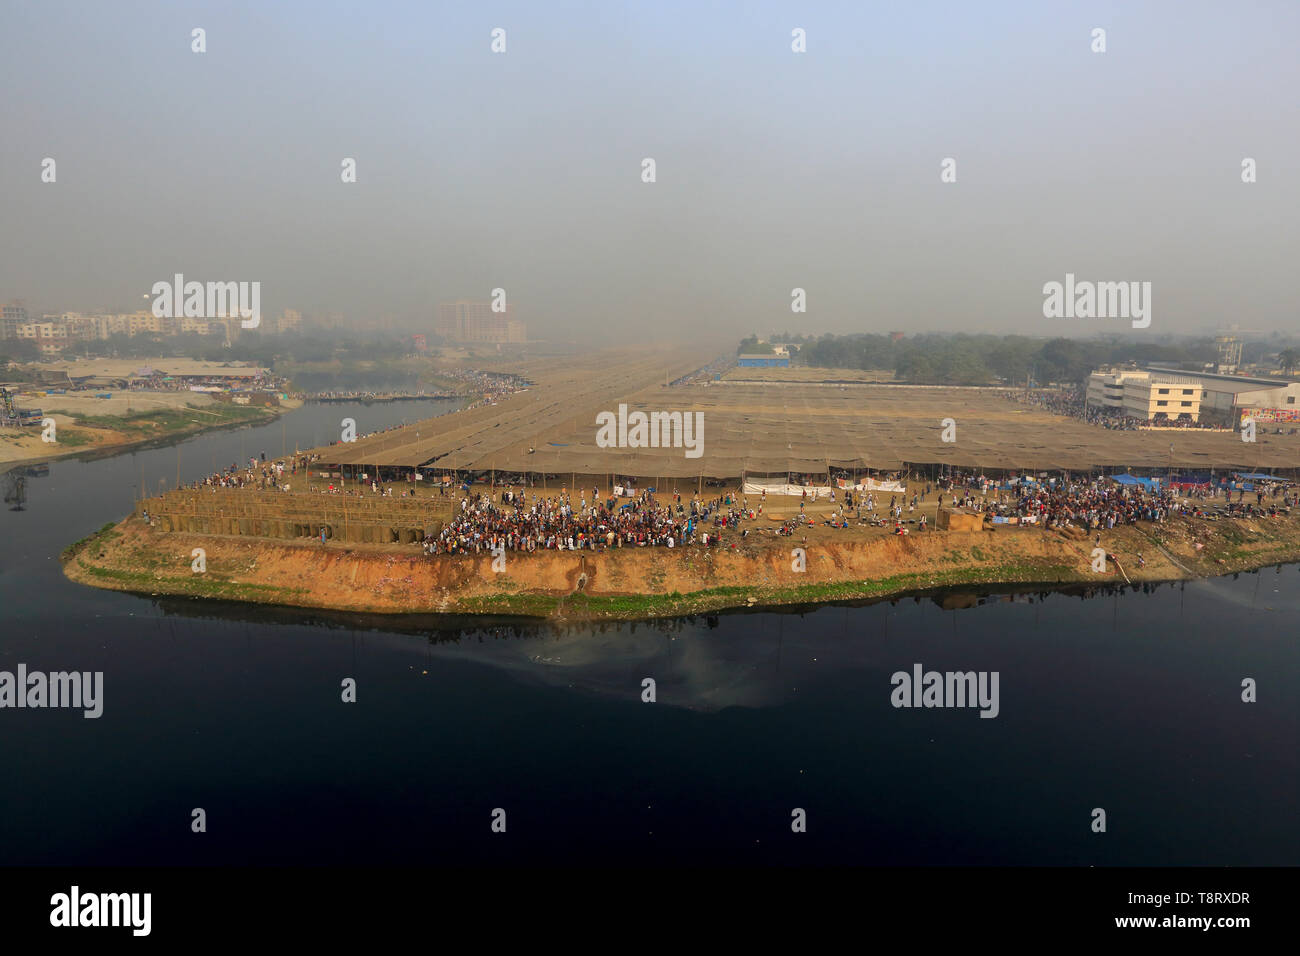 Tents are being pitched on the bank of river Turag to accommodate Muslims who will participate in Biswa Ijtema, the second largest religious congregat Stock Photo